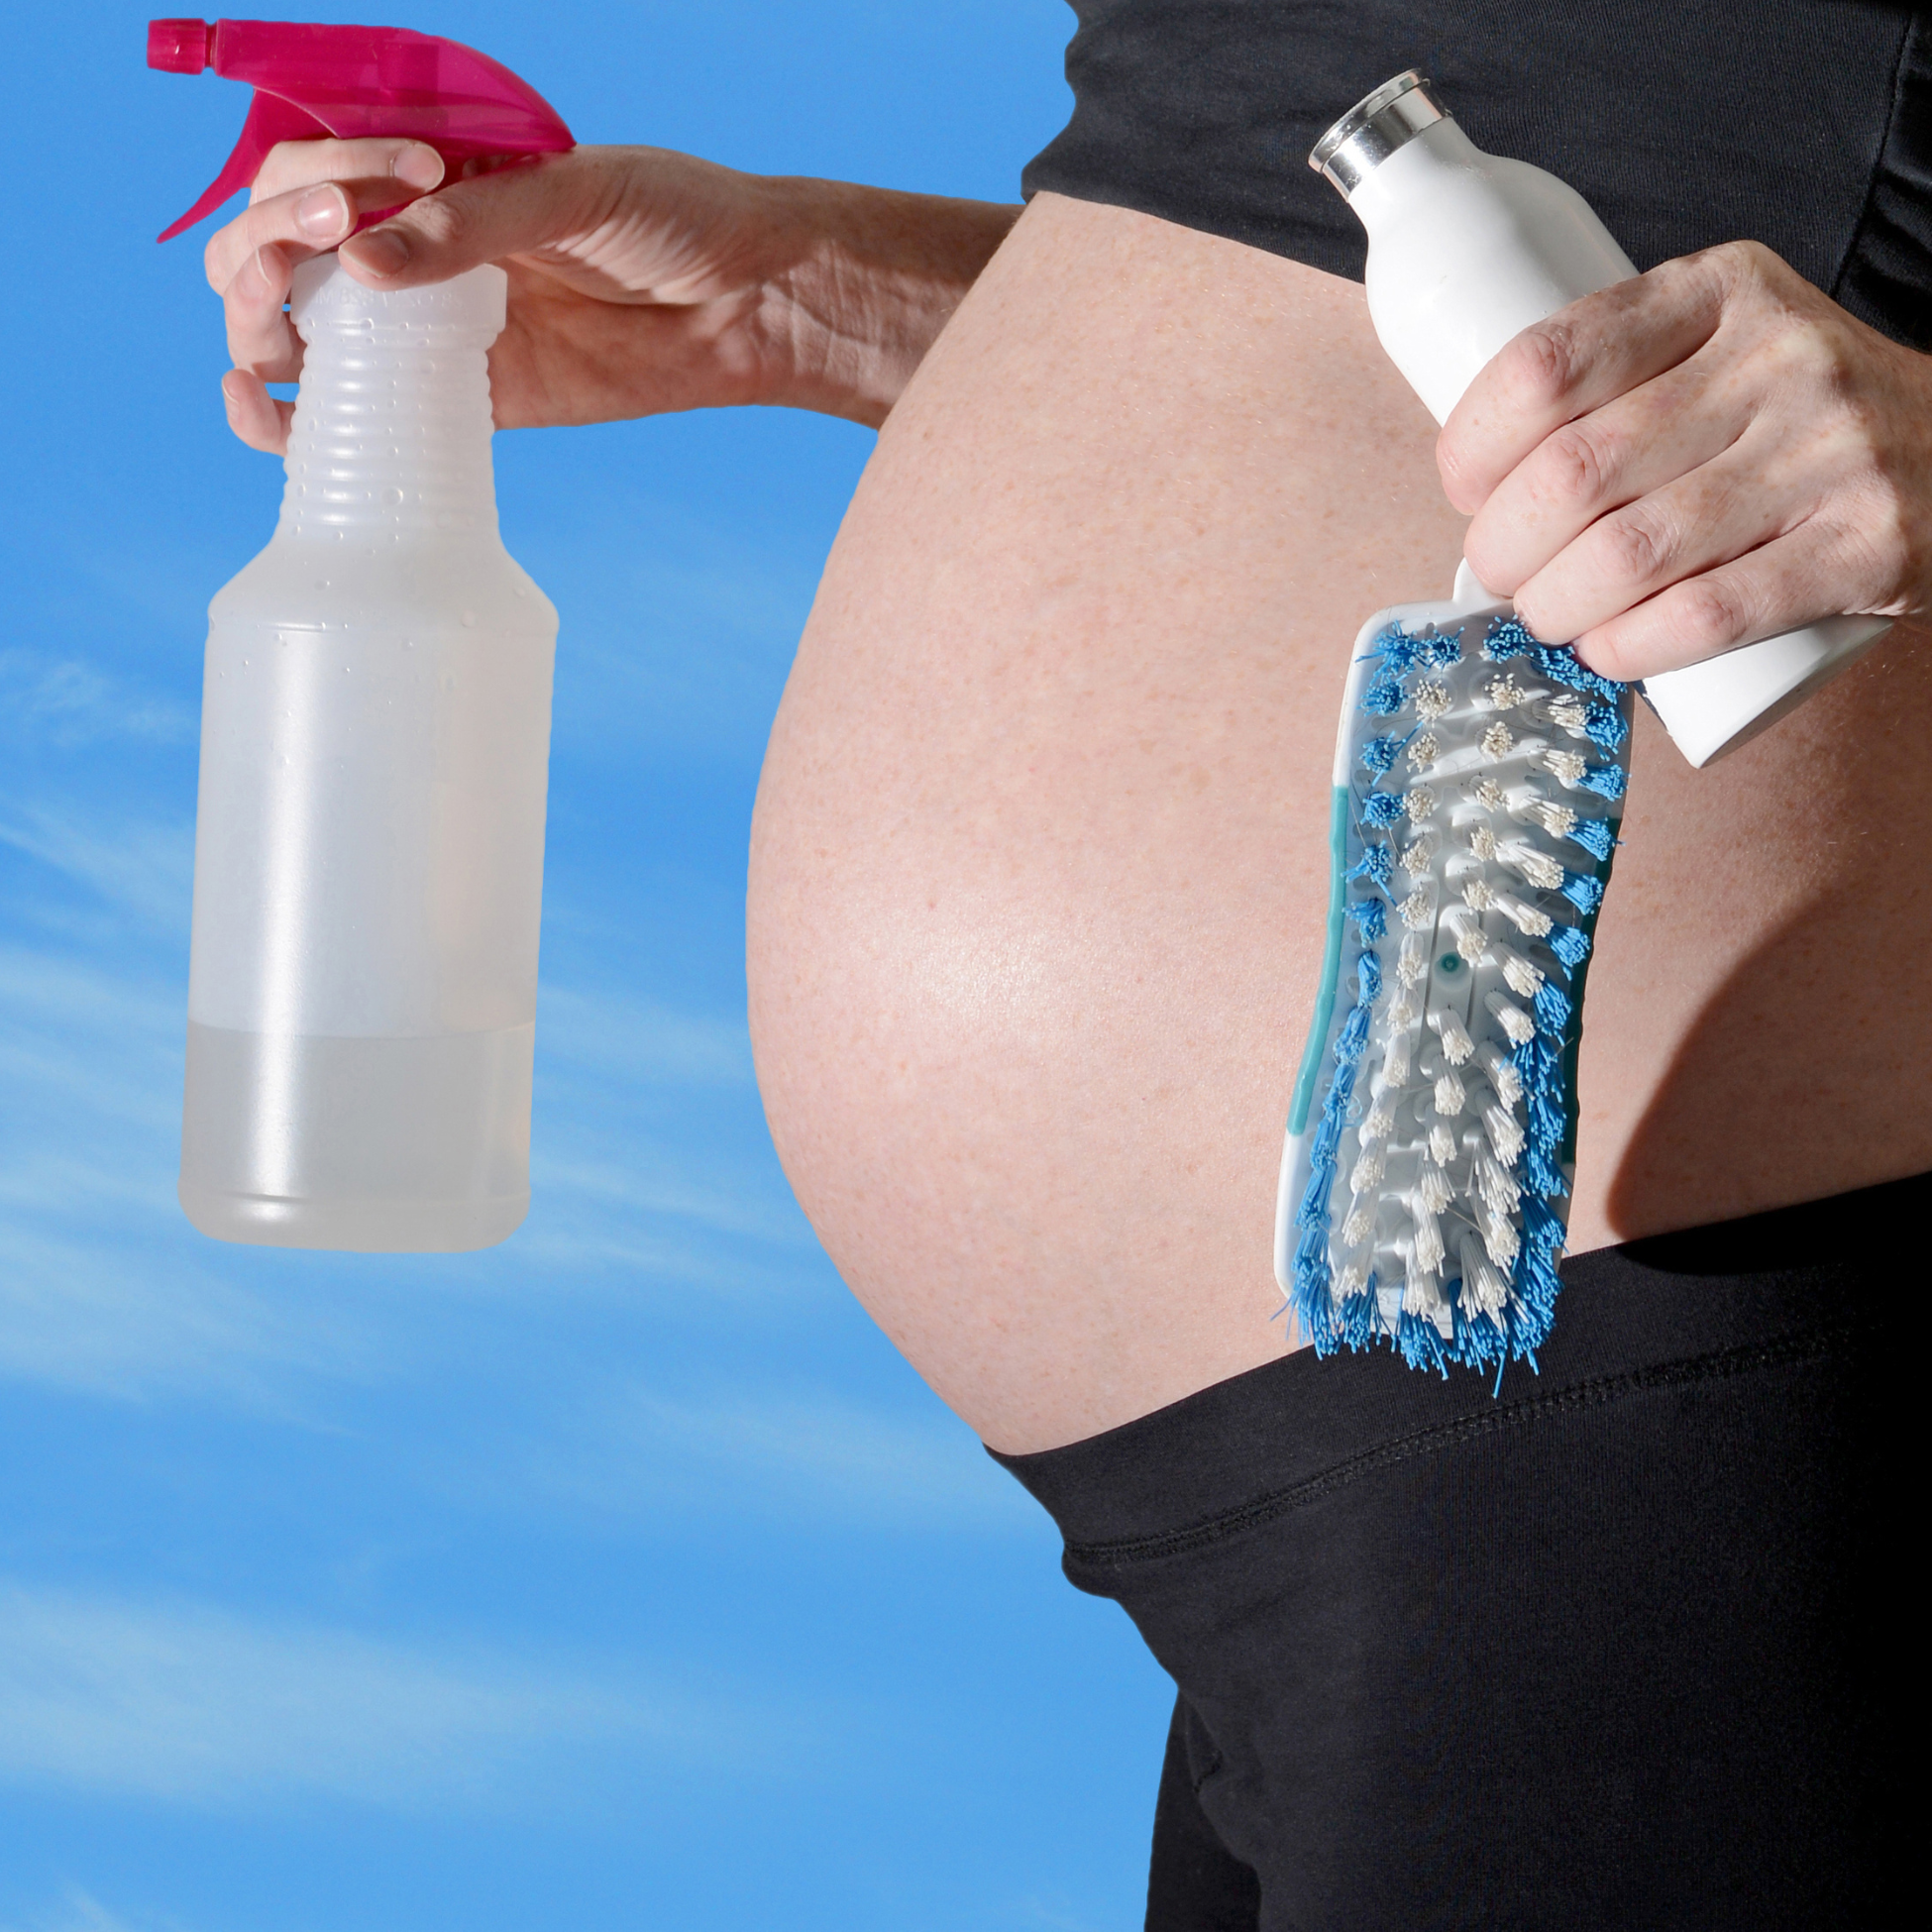 Safe Cleaning Products to Use While Being Pregnant